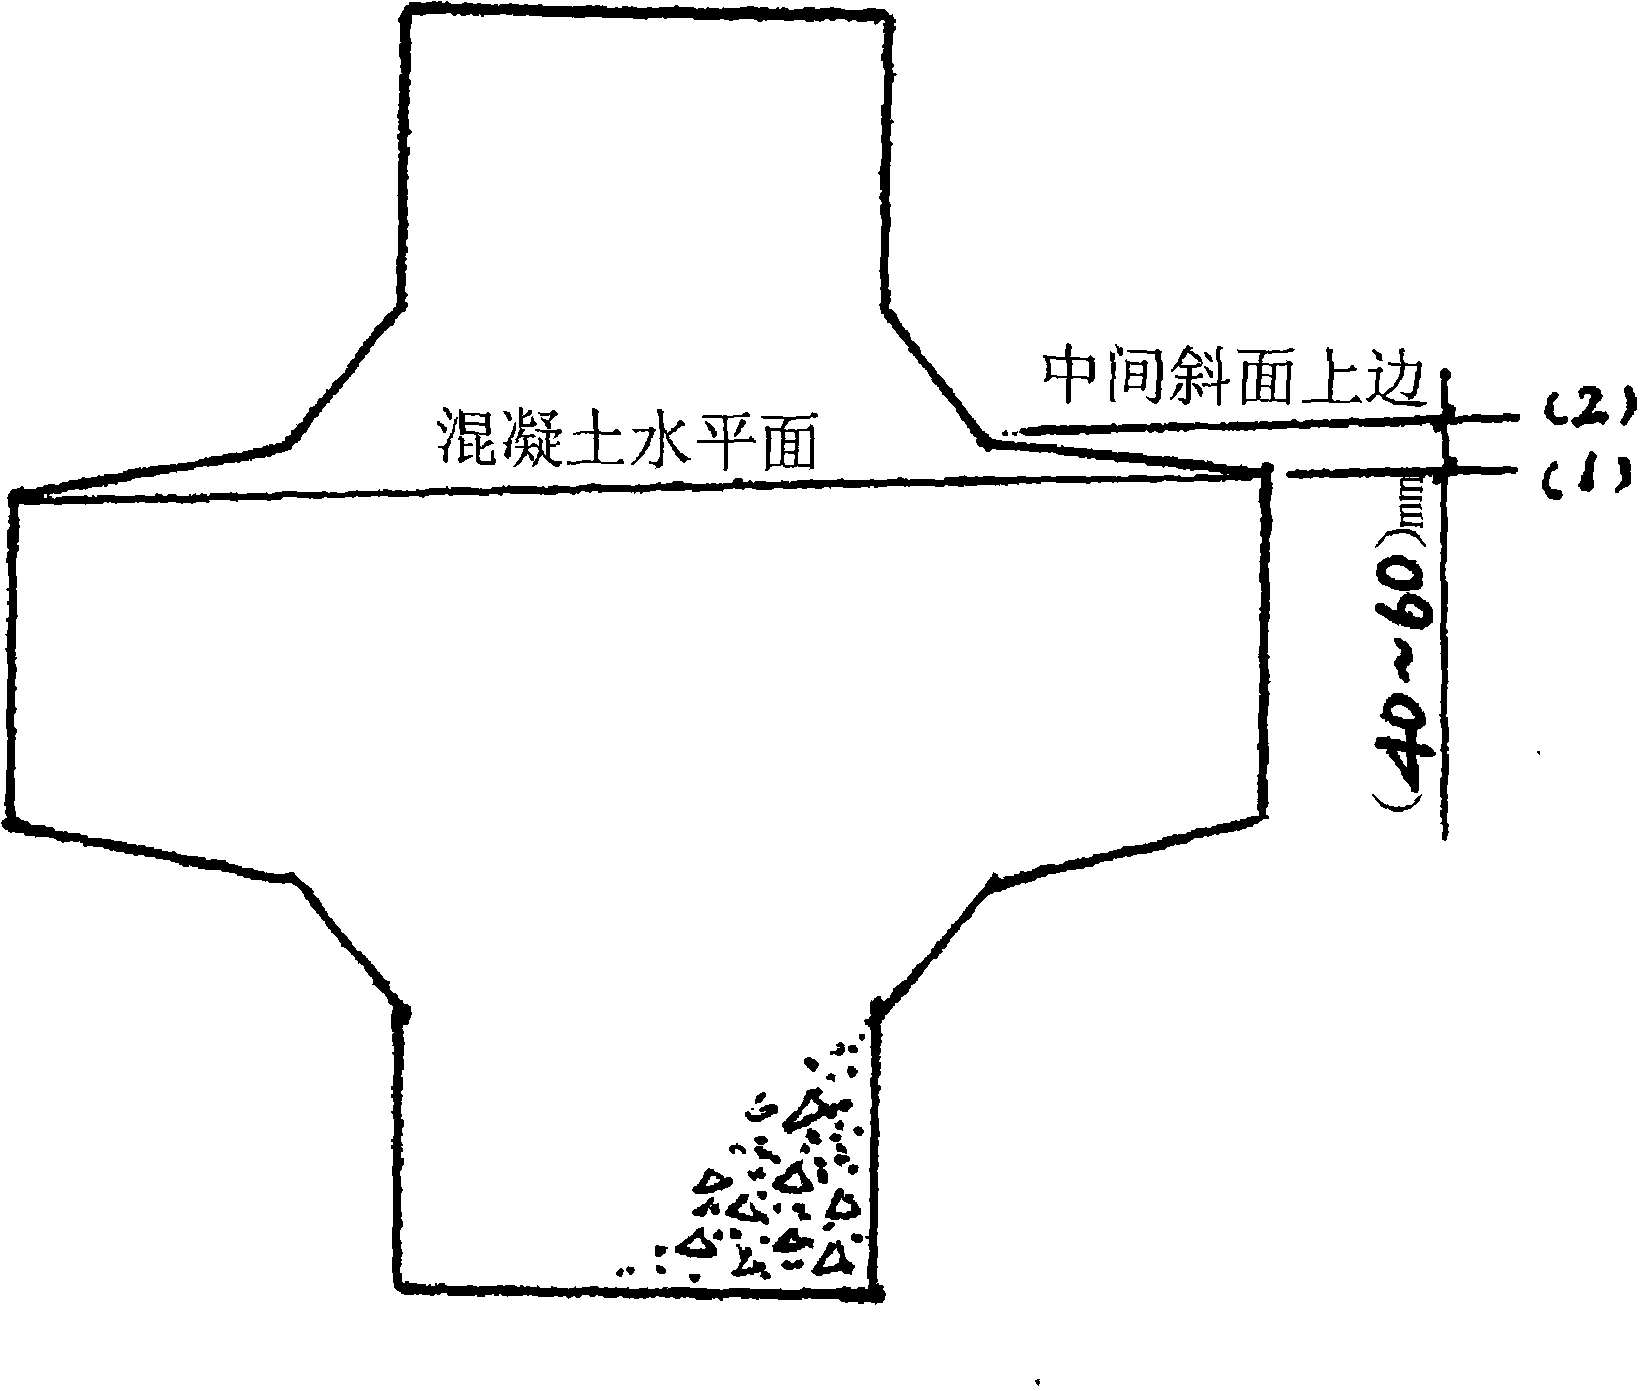 Method for producing concrete building block by using pipe pile wastewater slurry